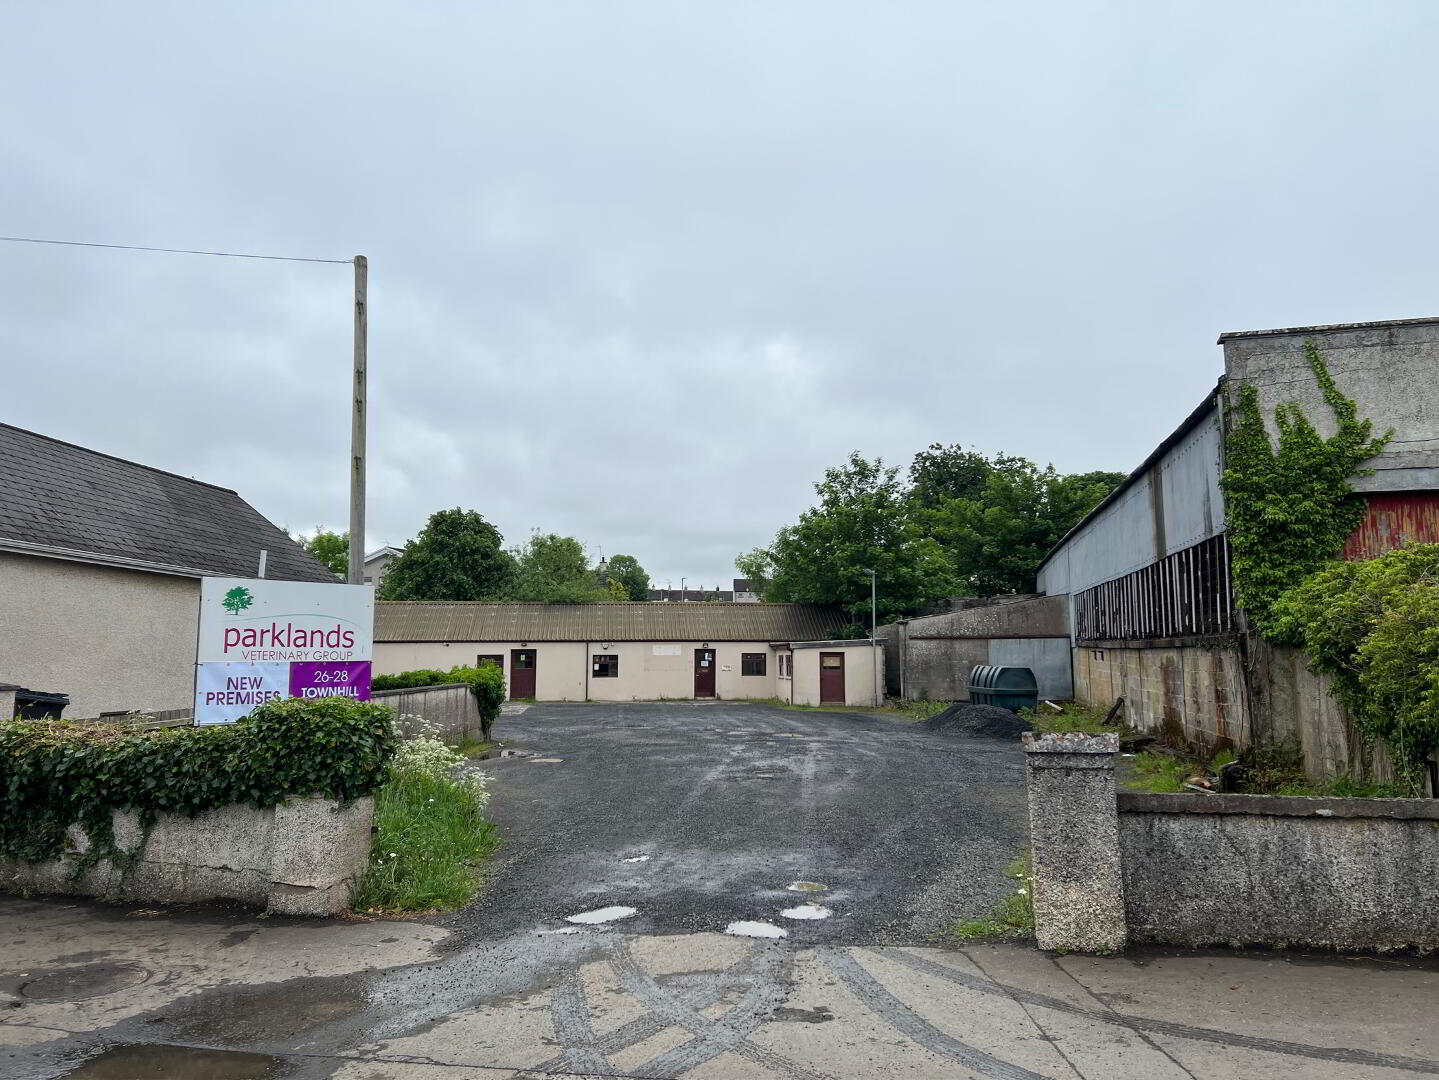 Unit, Offices & Stables, 7/9 Townhill Road